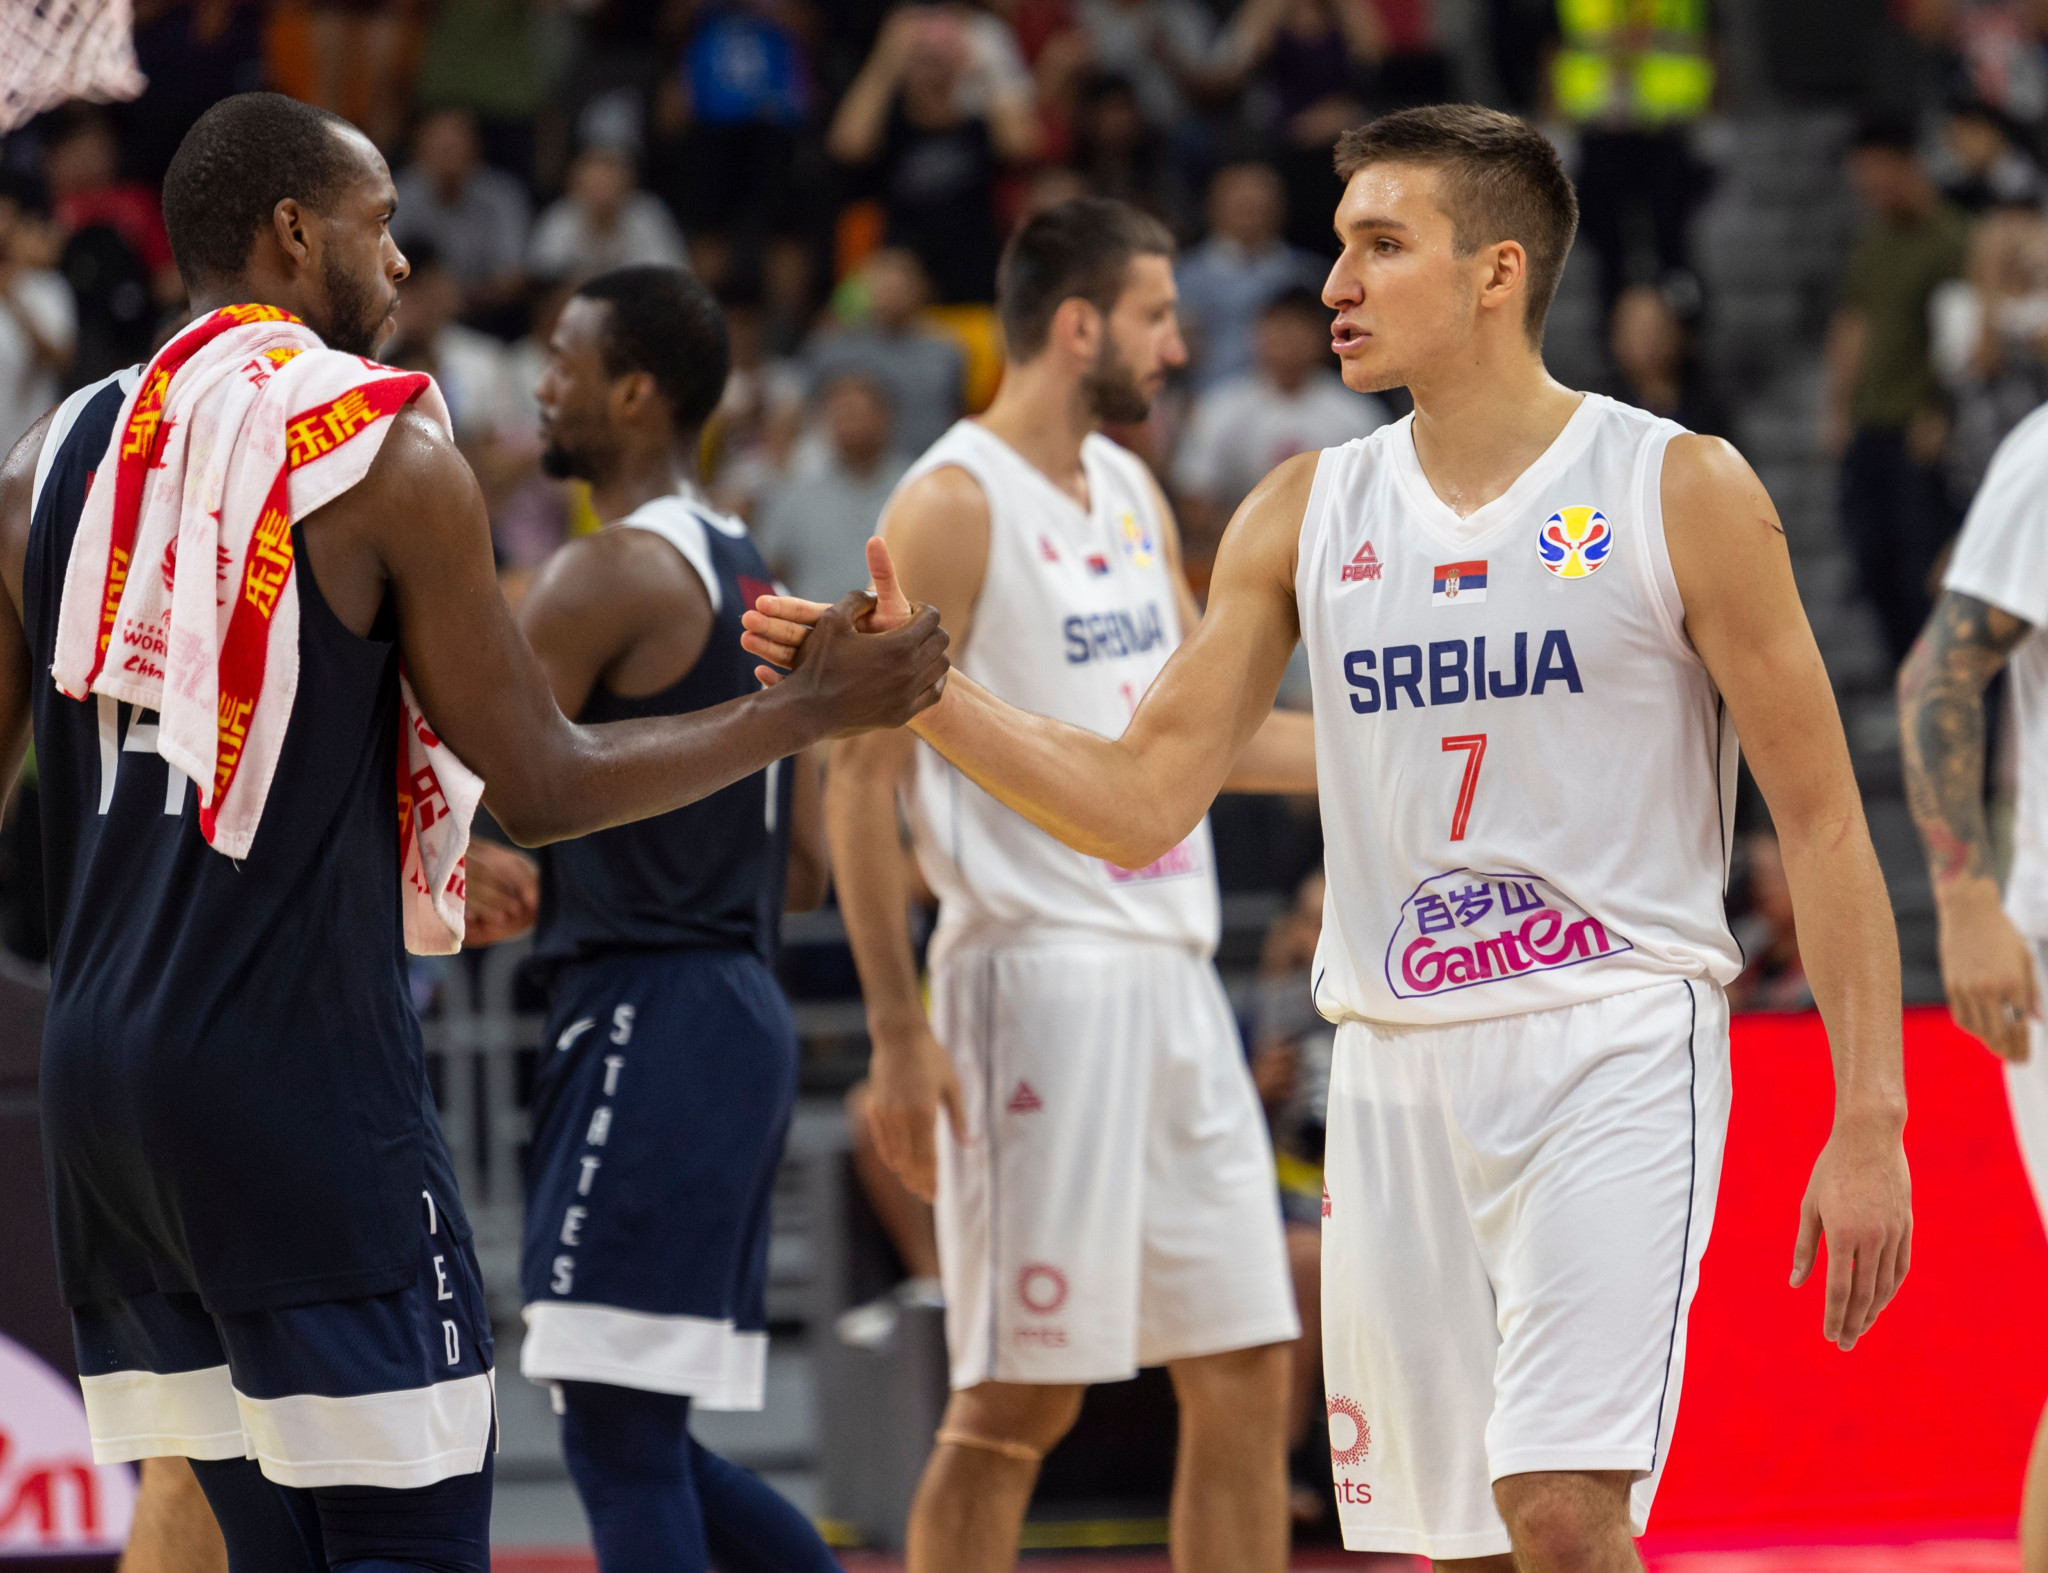 United States to play for seventh place at FIBA World Cup after Serbia defeat